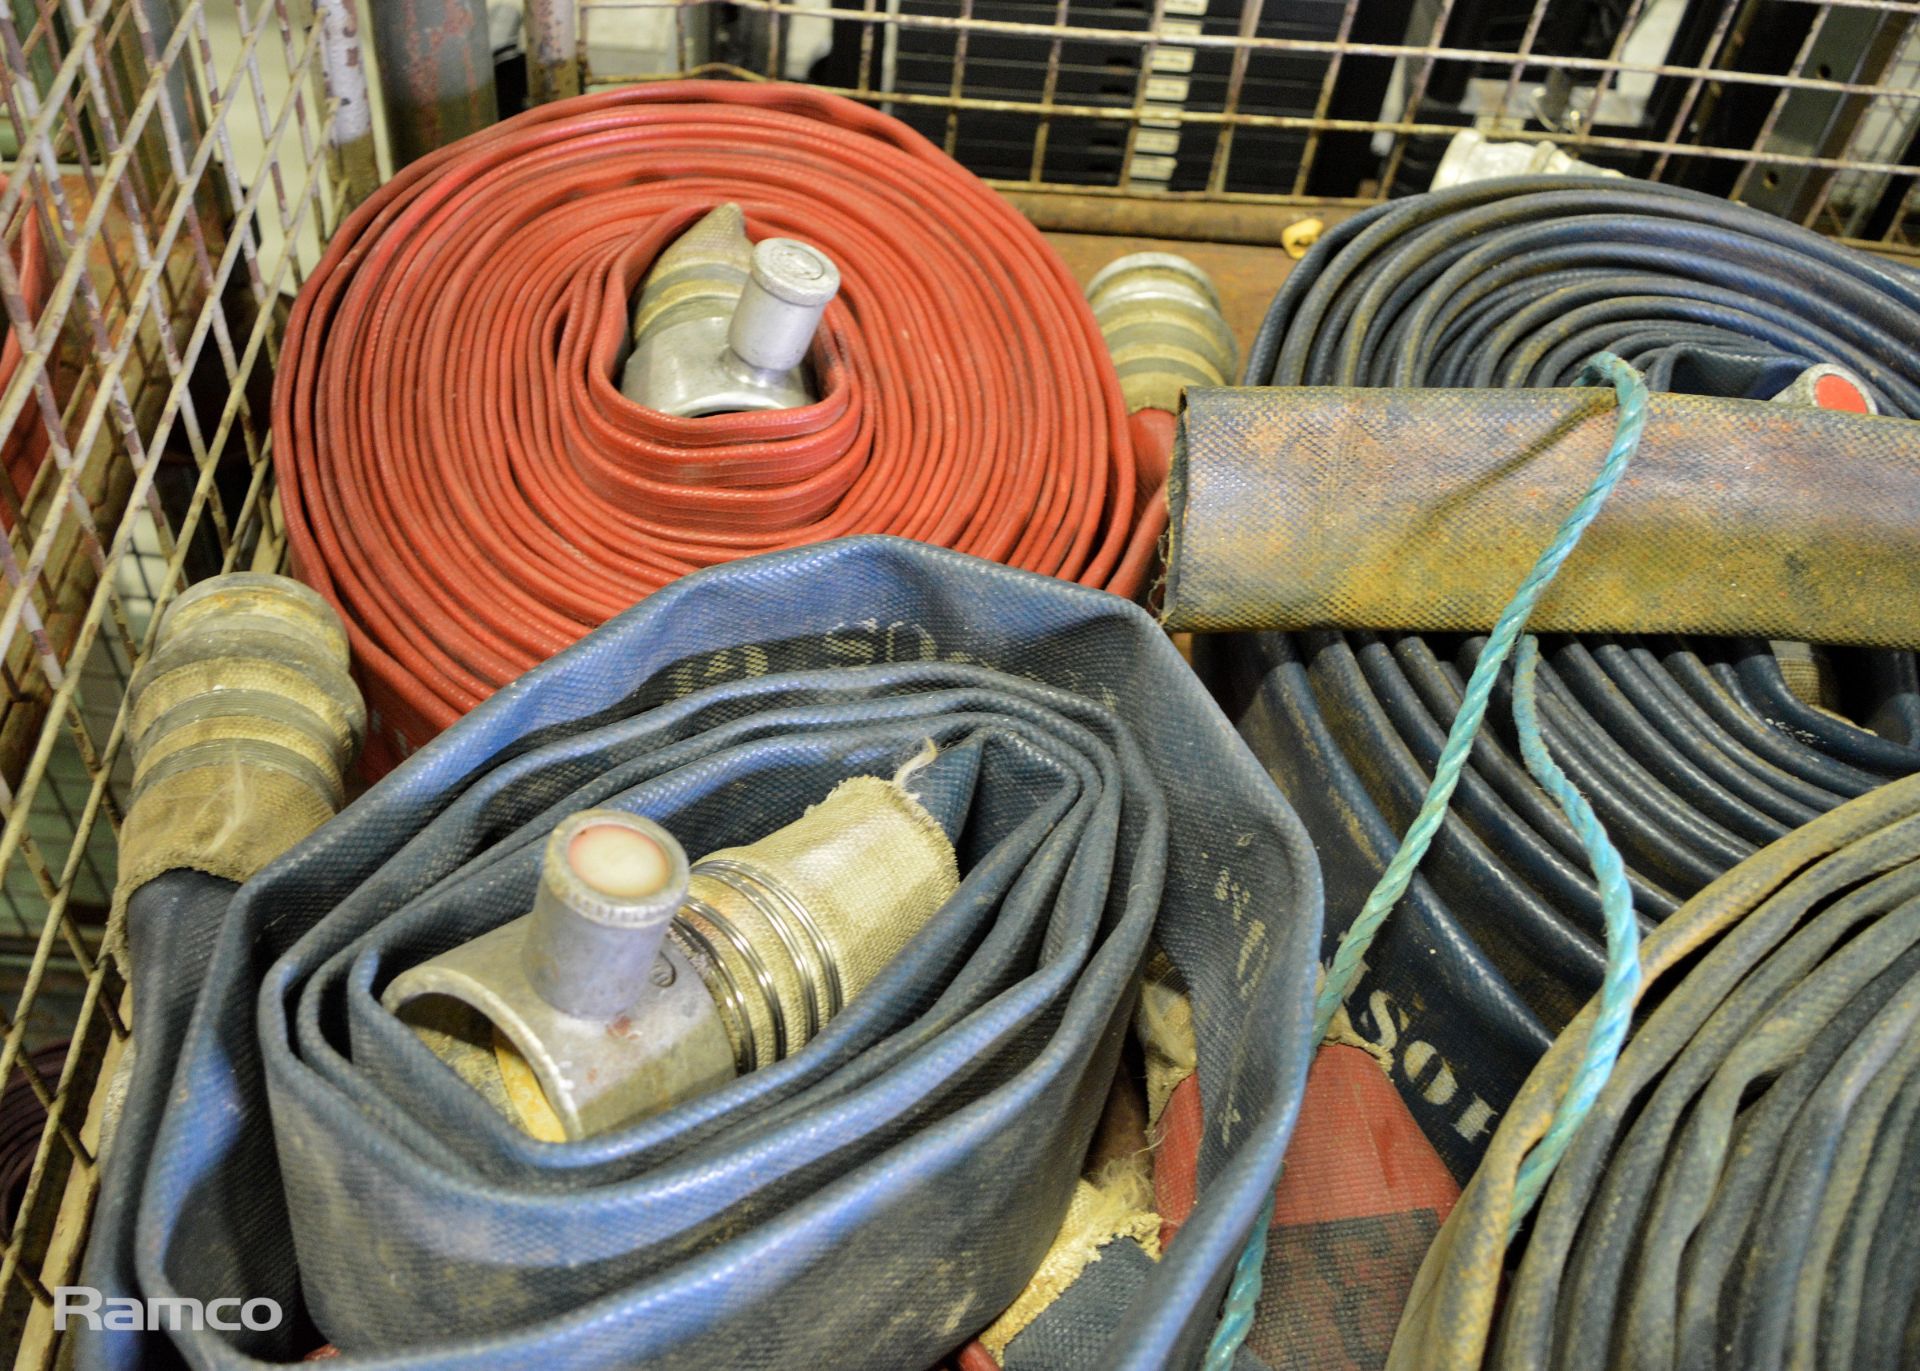 9x Assorted flat lay fire hose 65mm diameter - Image 2 of 4